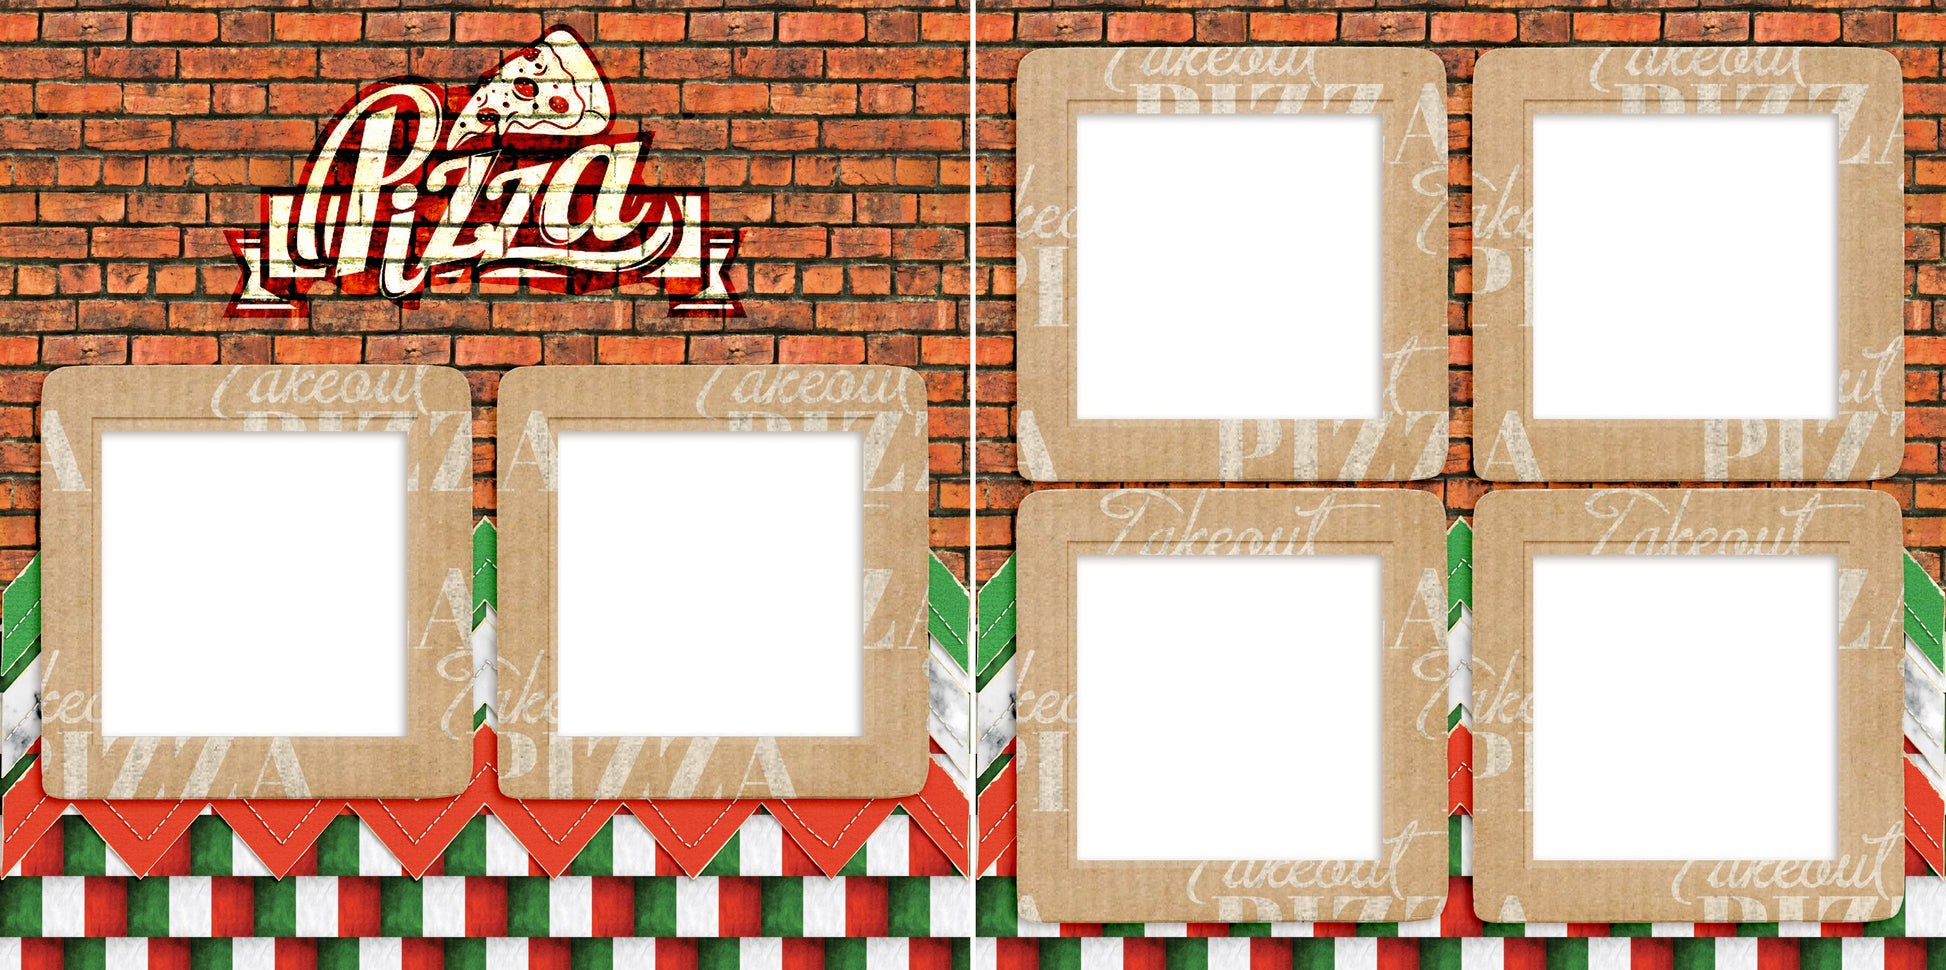 Brick Wall Pizza - Digital Scrapbook Pages - INSTANT DOWNLOAD - EZscrapbooks Scrapbook Layouts pizza, takeout